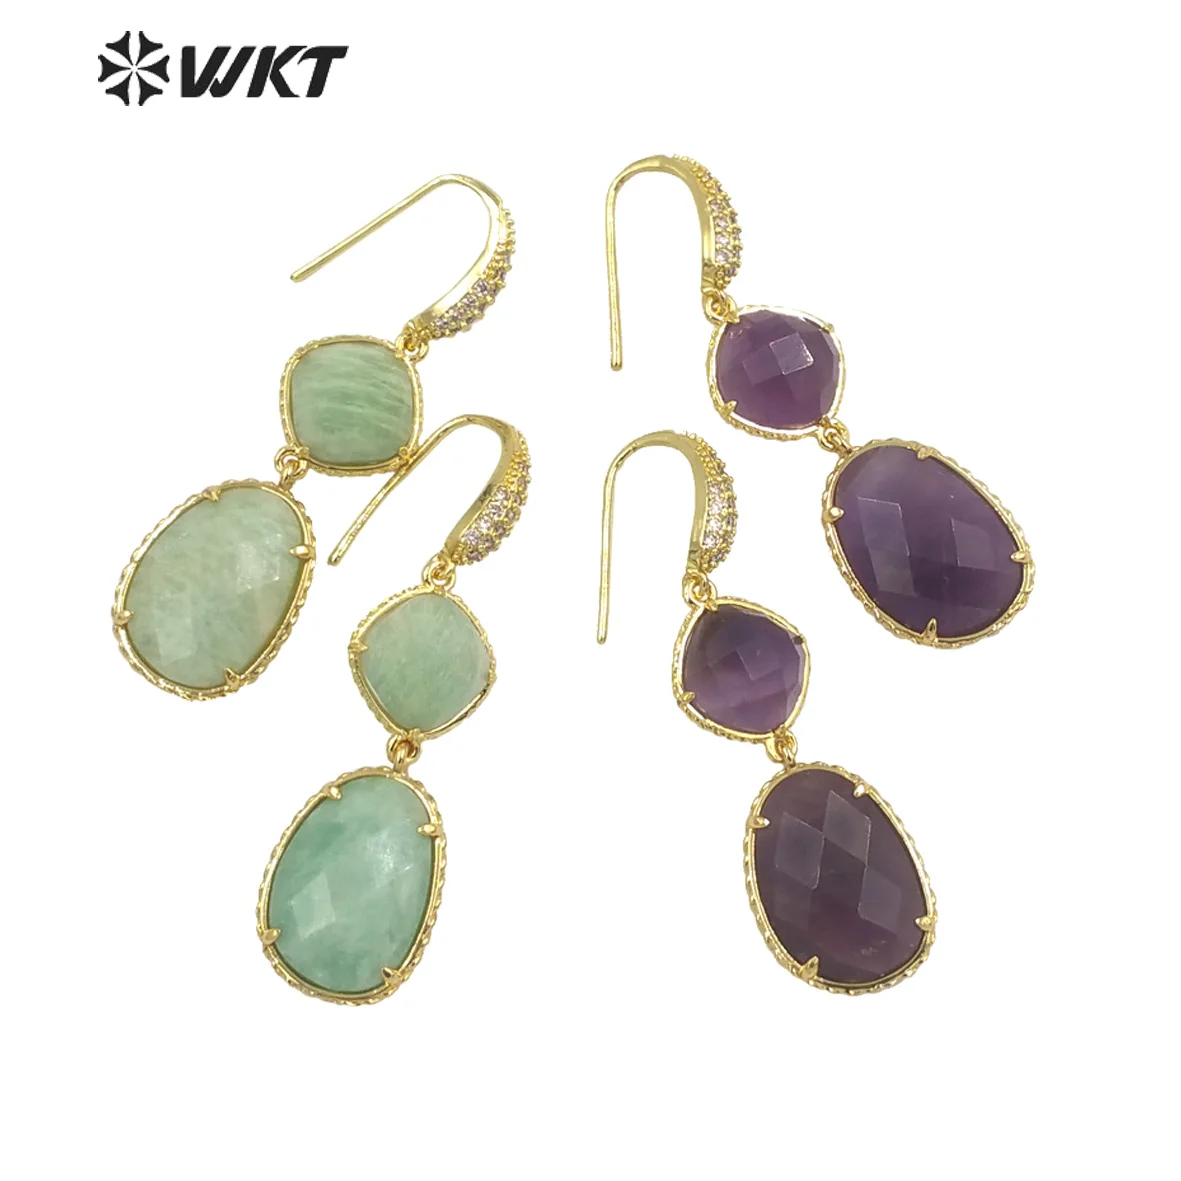 

WT-E687 WKT 2022 Delicate Retro party natural gemstone gold-plate Earrings birthday party gift trend jewelry attractive